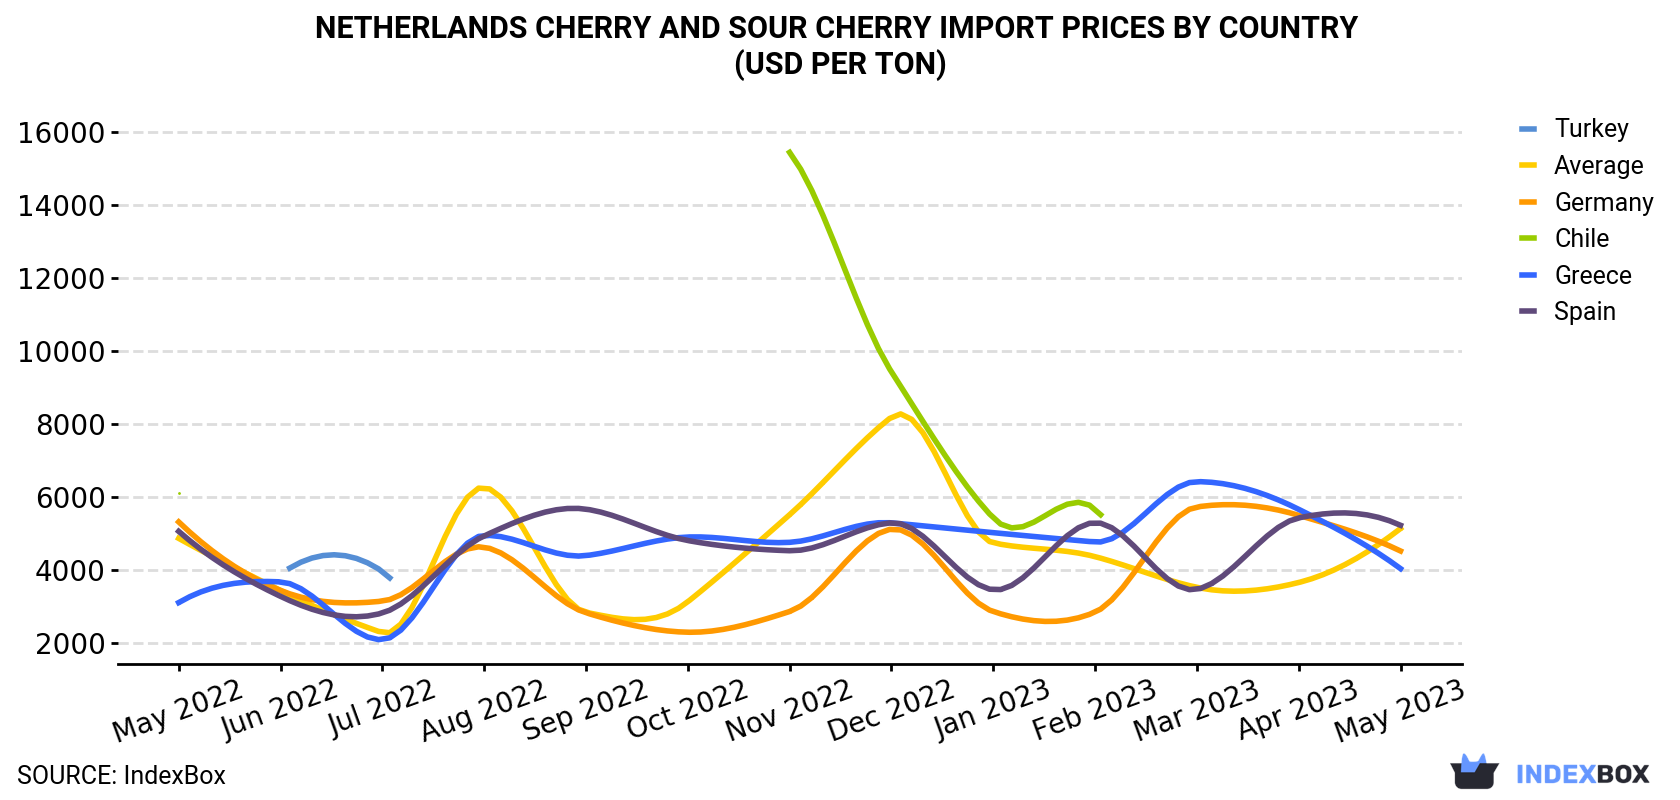 Netherlands Cherry and Sour Cherry Import Prices By Country (USD Per Ton)